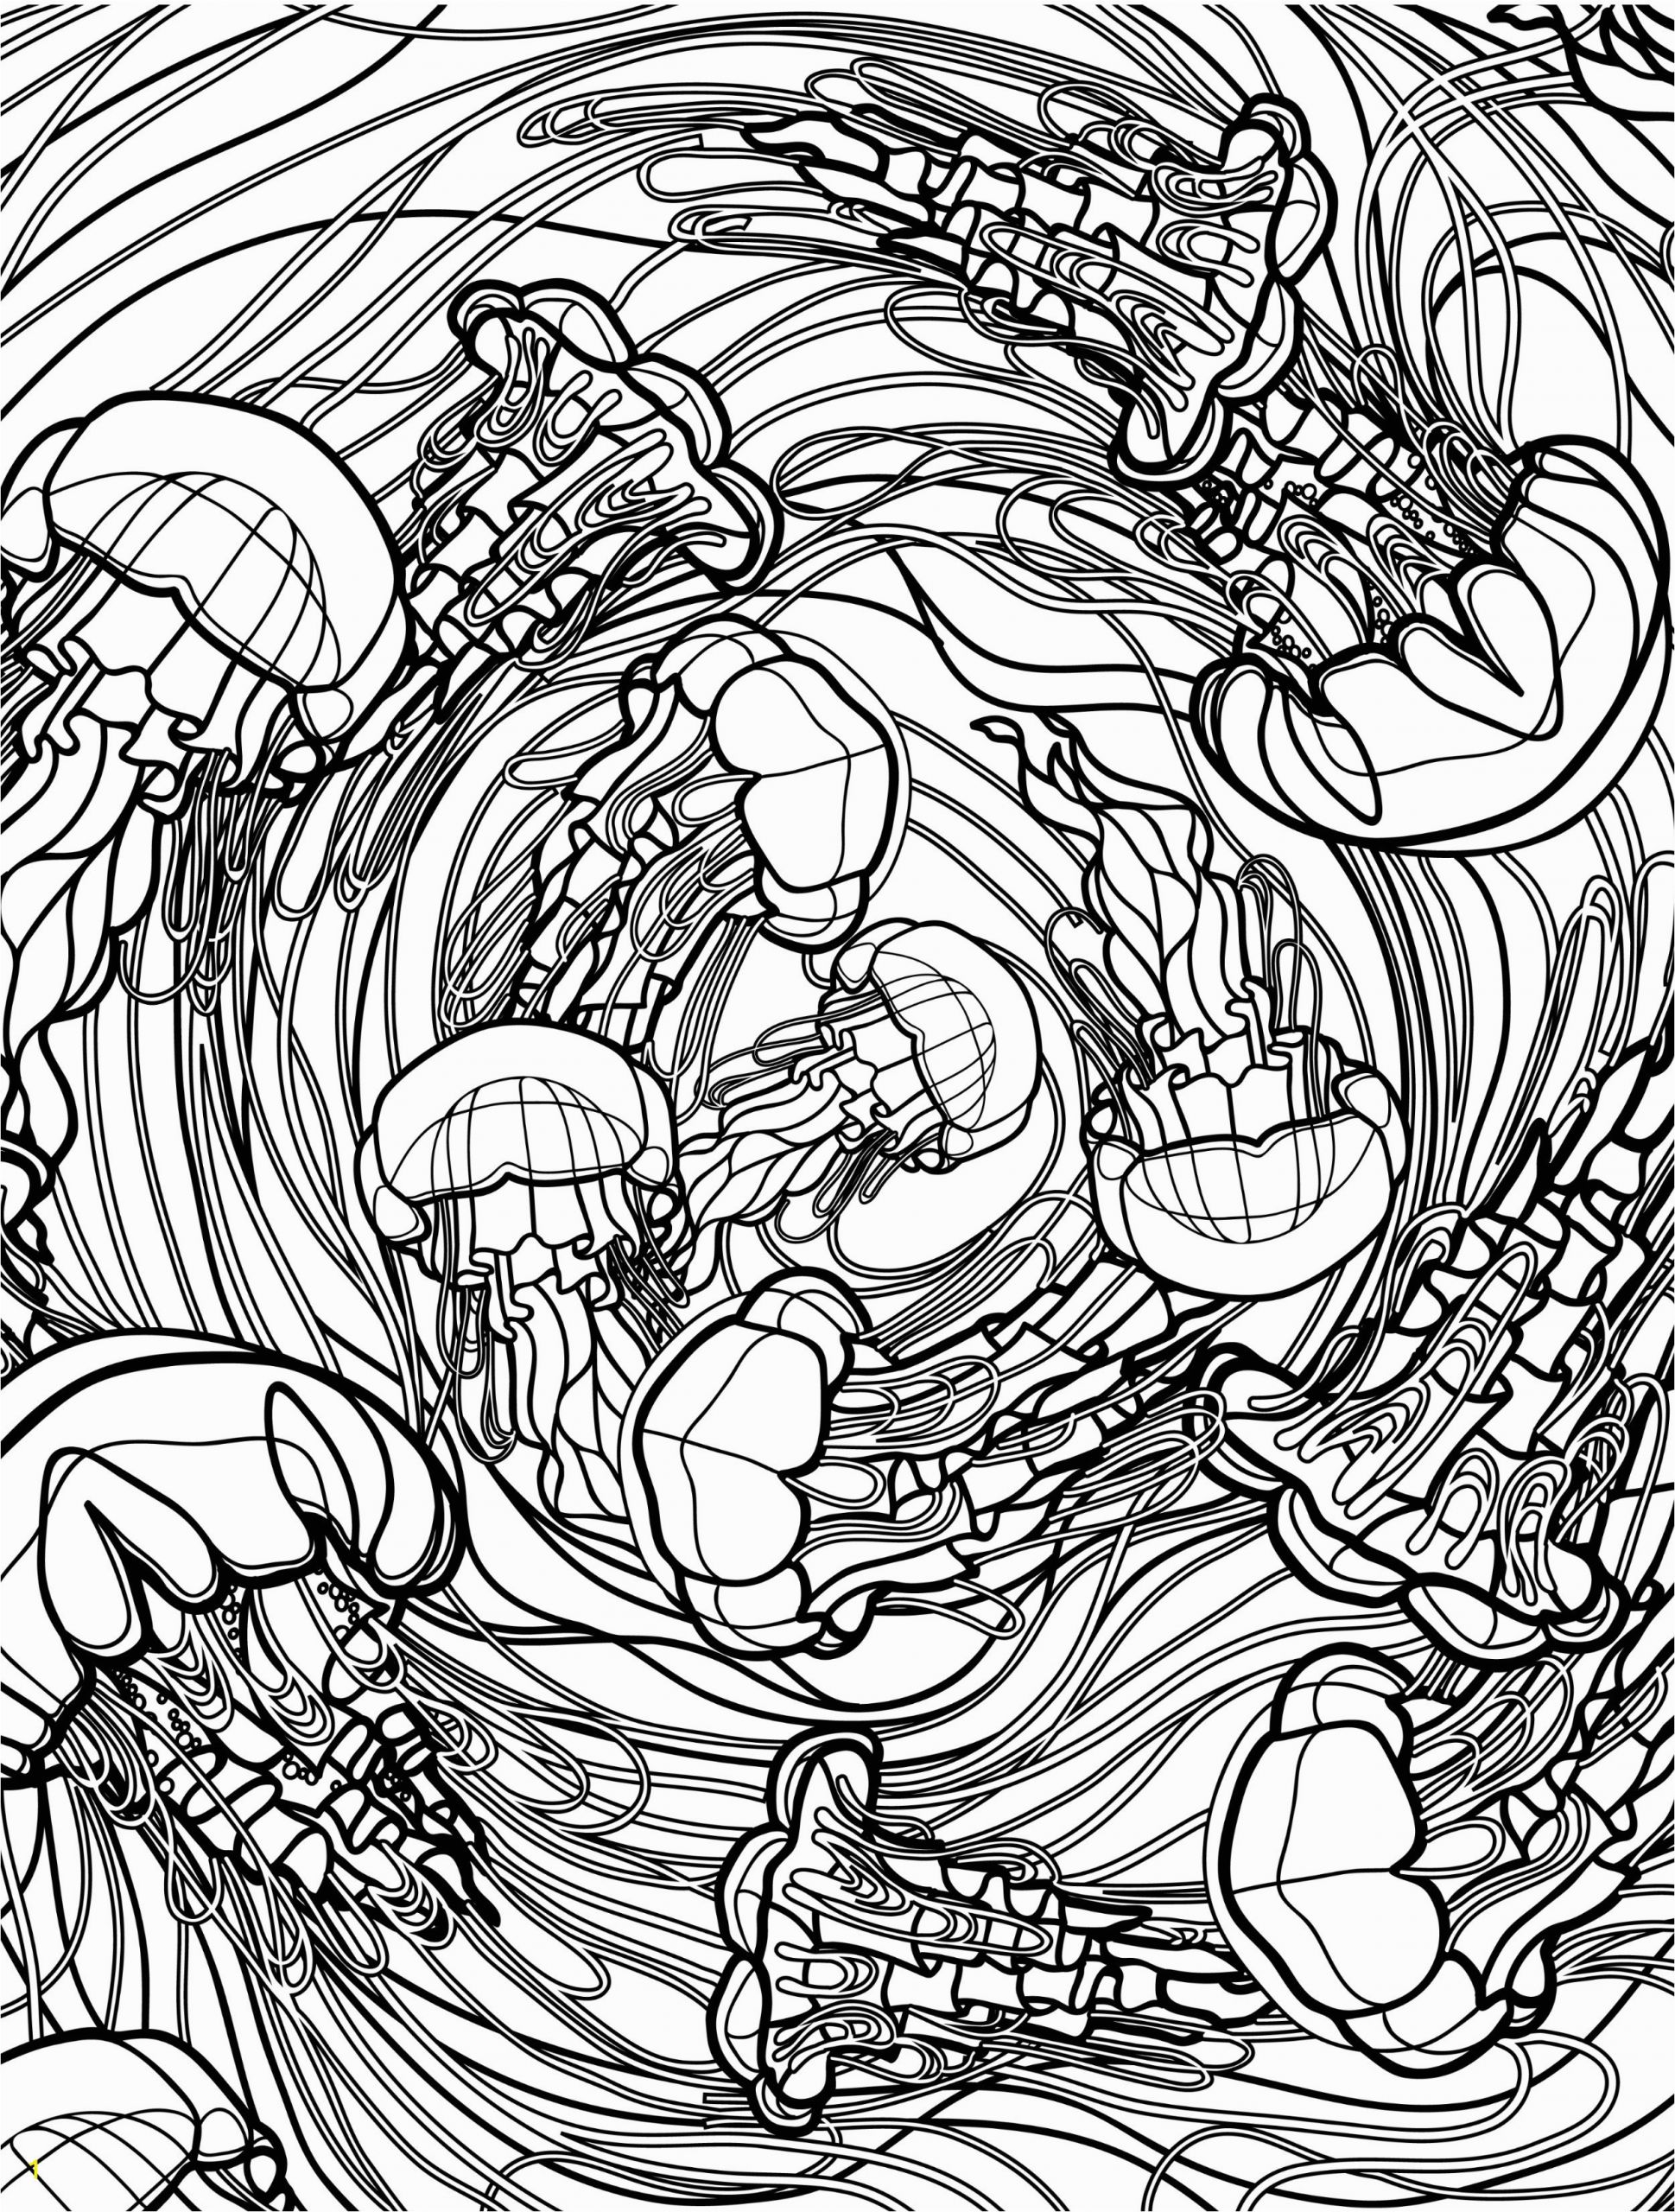 Free Printable Ocean Coloring Pages for Adults Sea Coloring Pages for Adults at Getdrawings